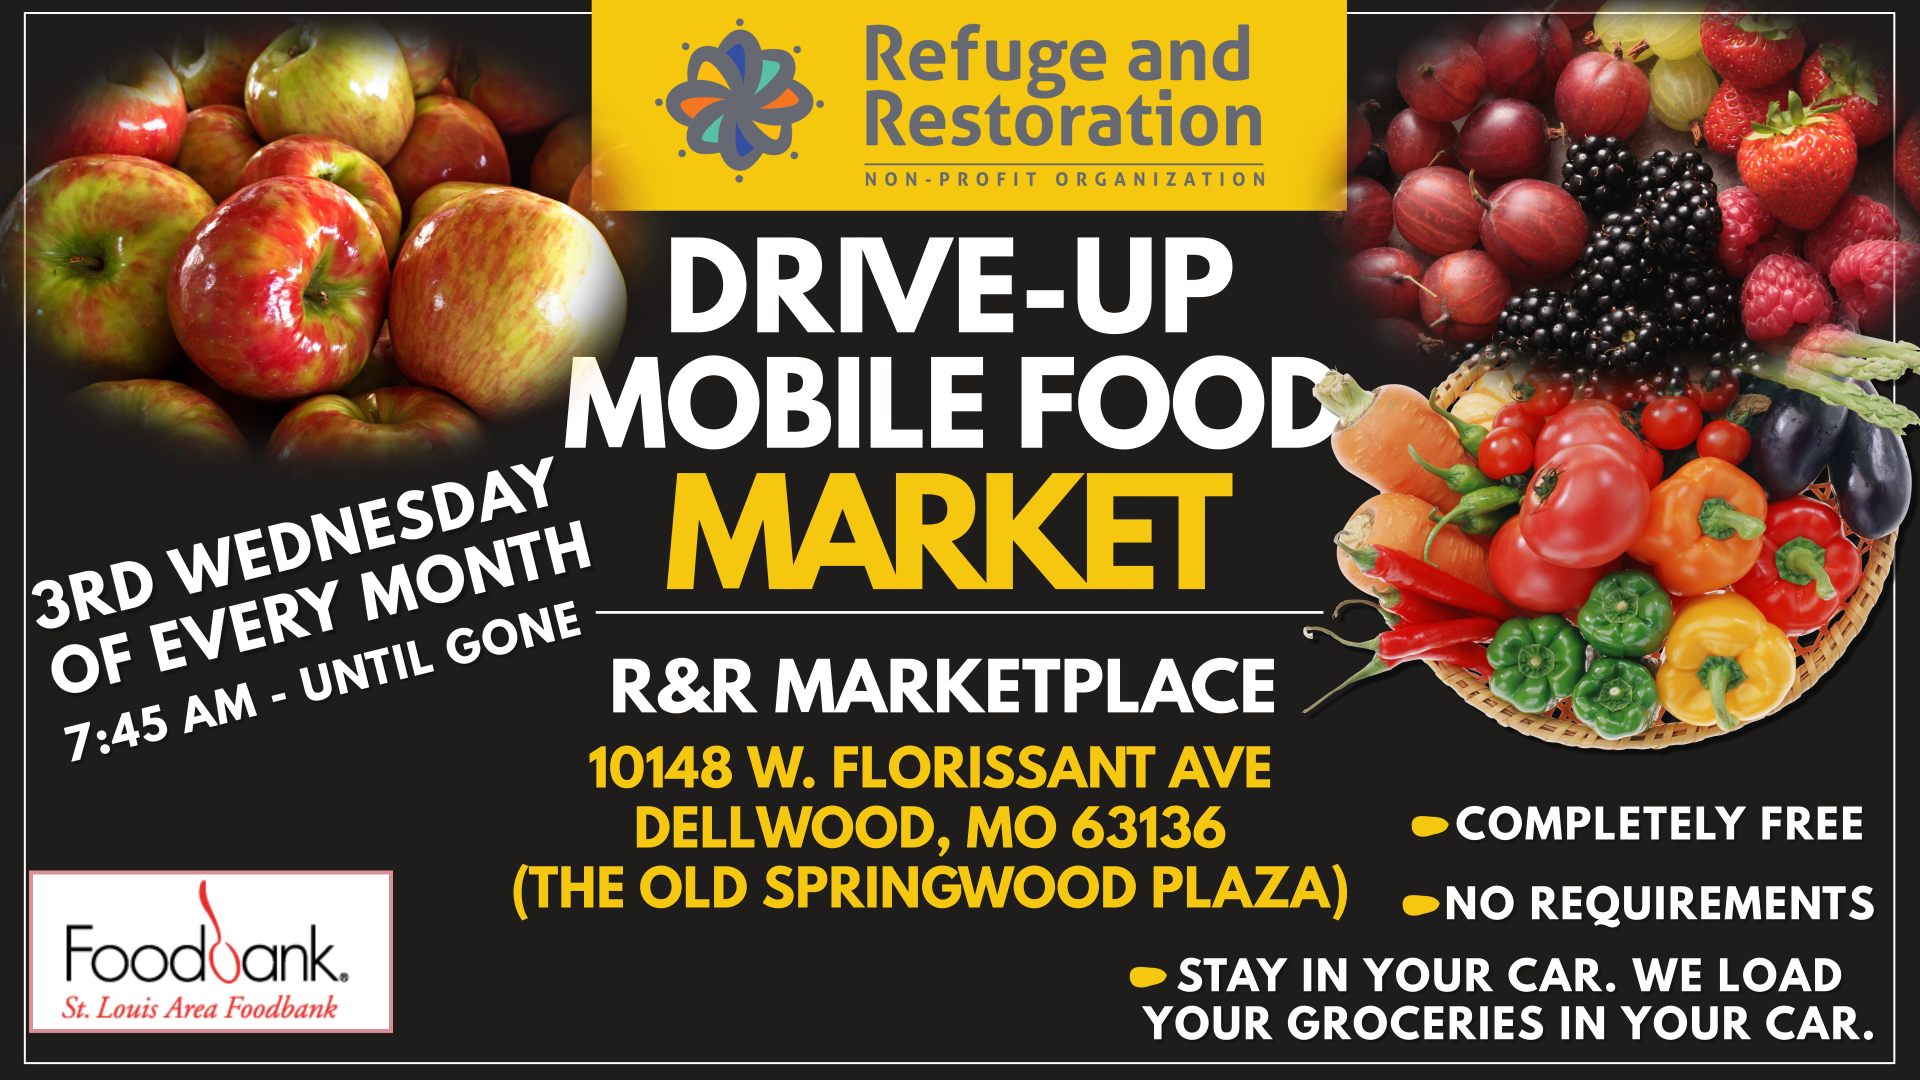 *New Time* for Free Mobile Food Market!